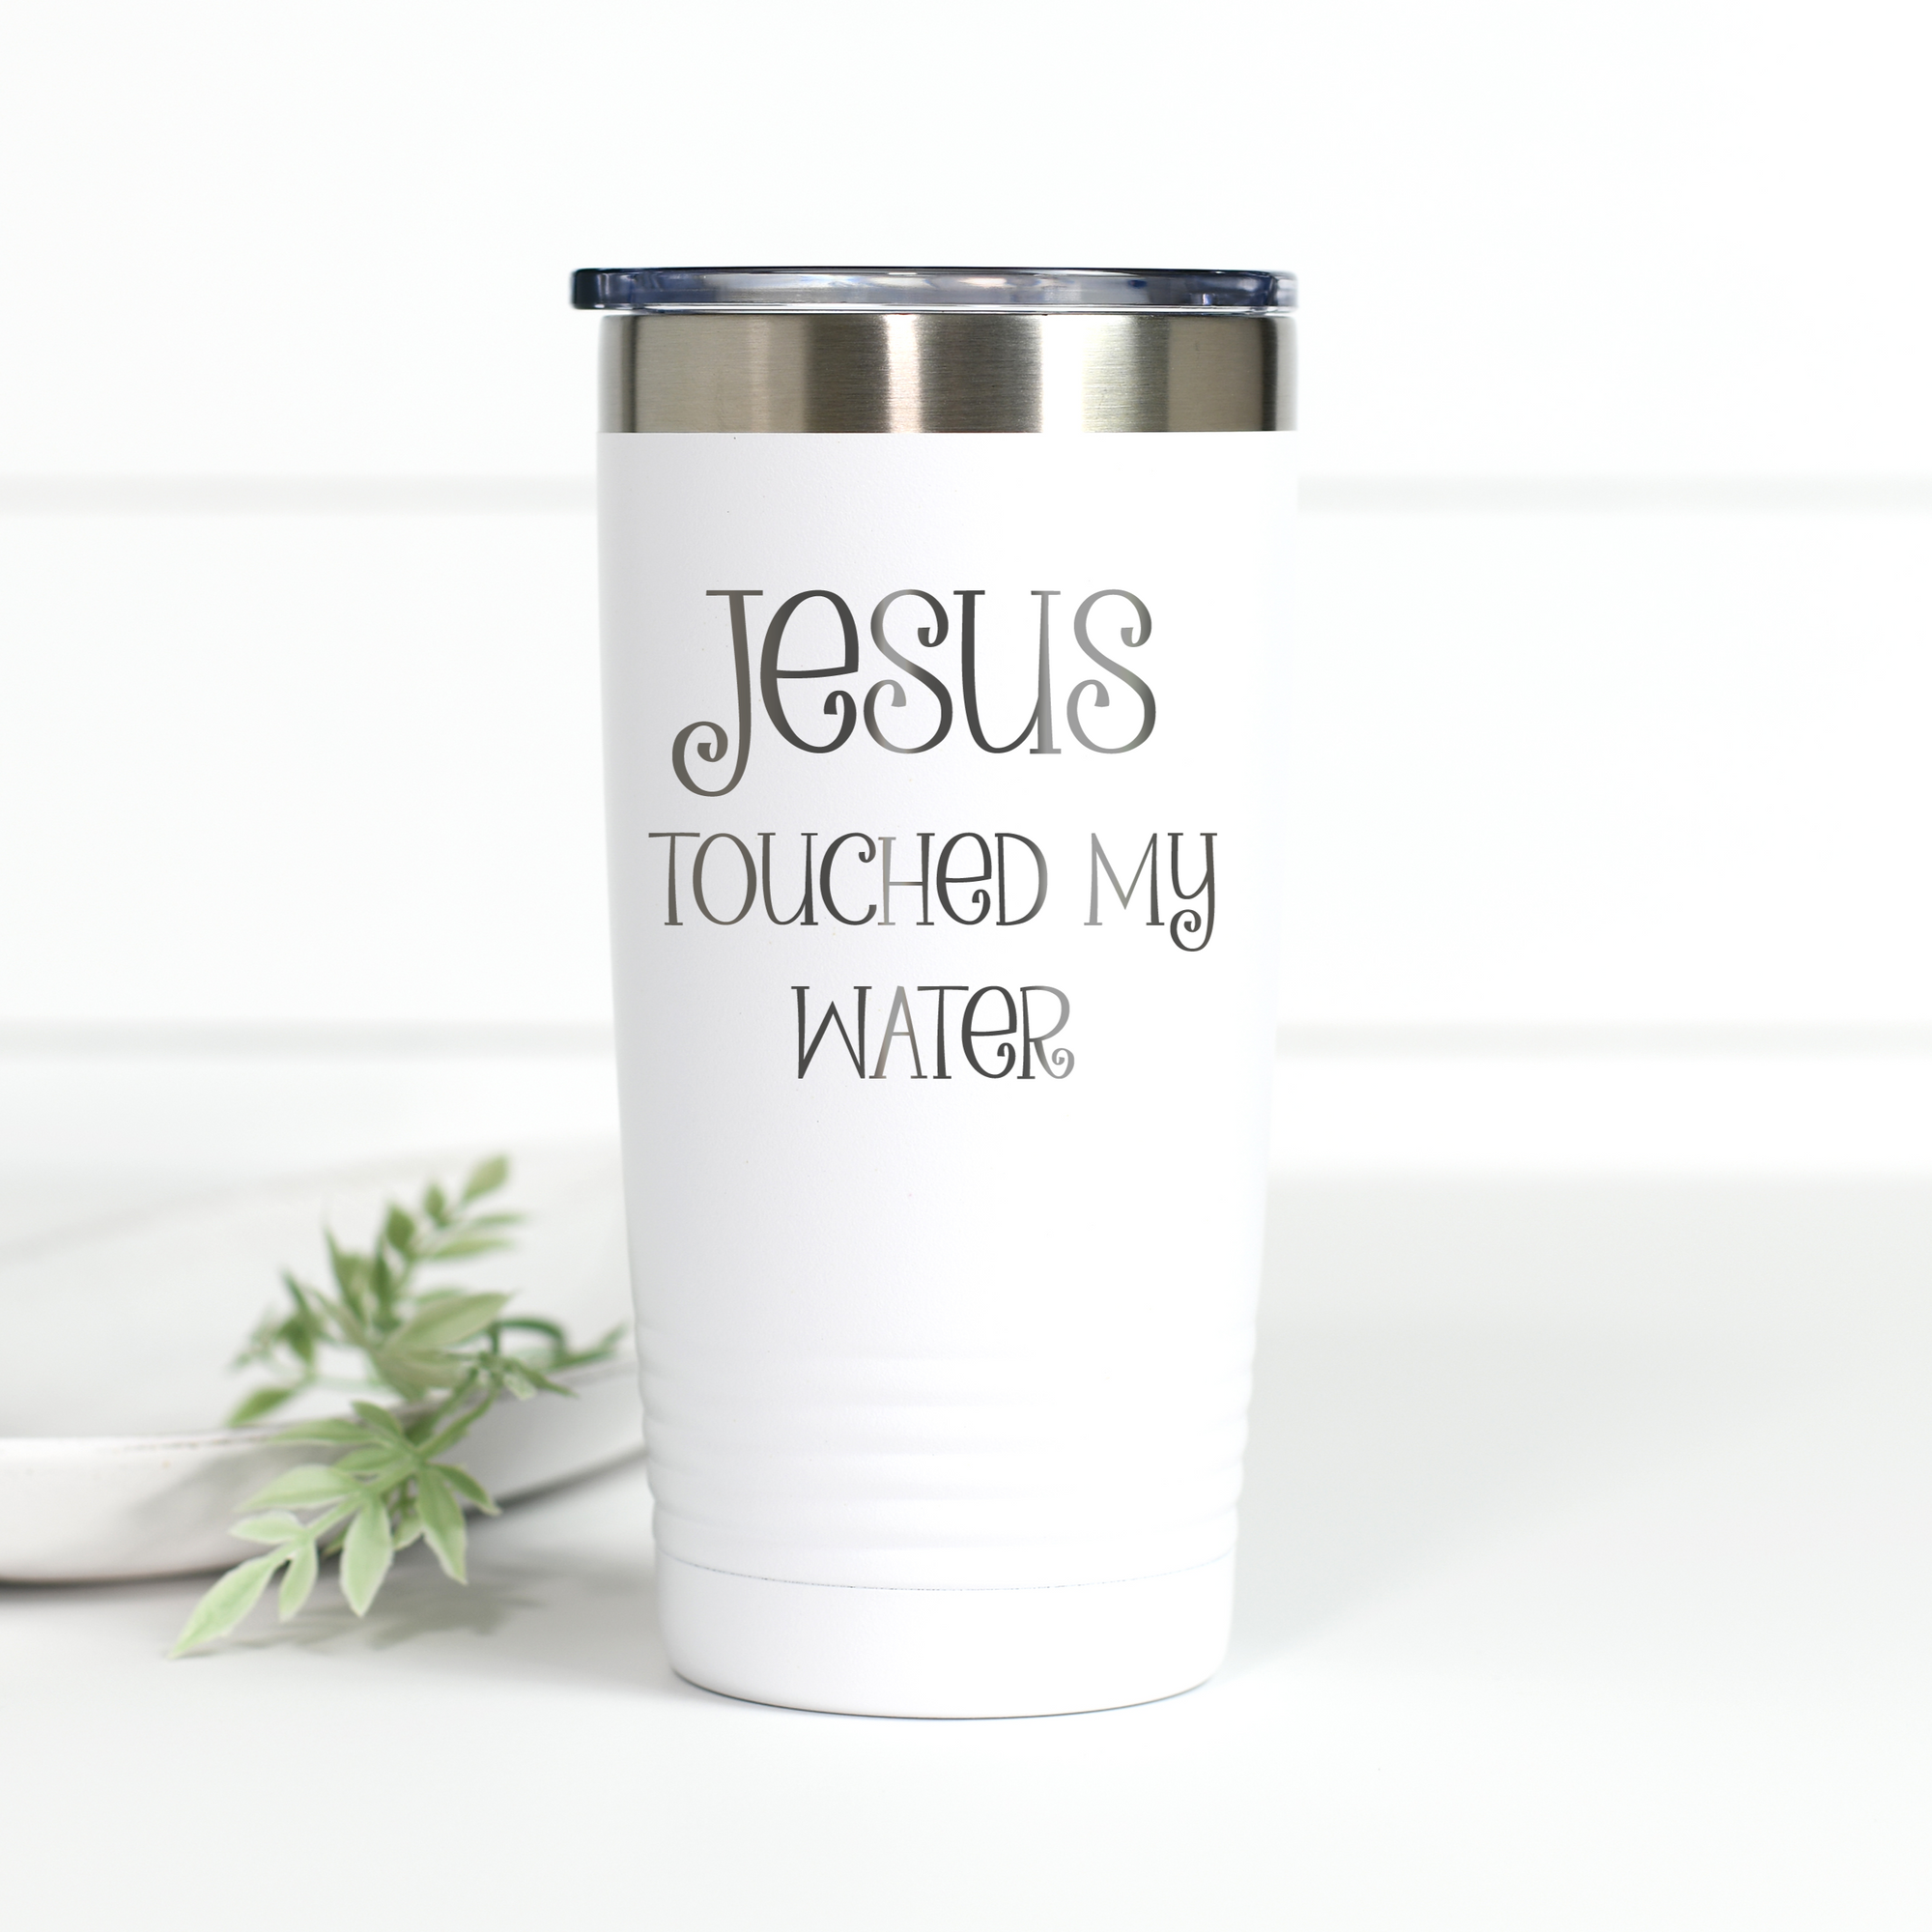 Jesus Touched My Water 20 oz Engraved Tumbler